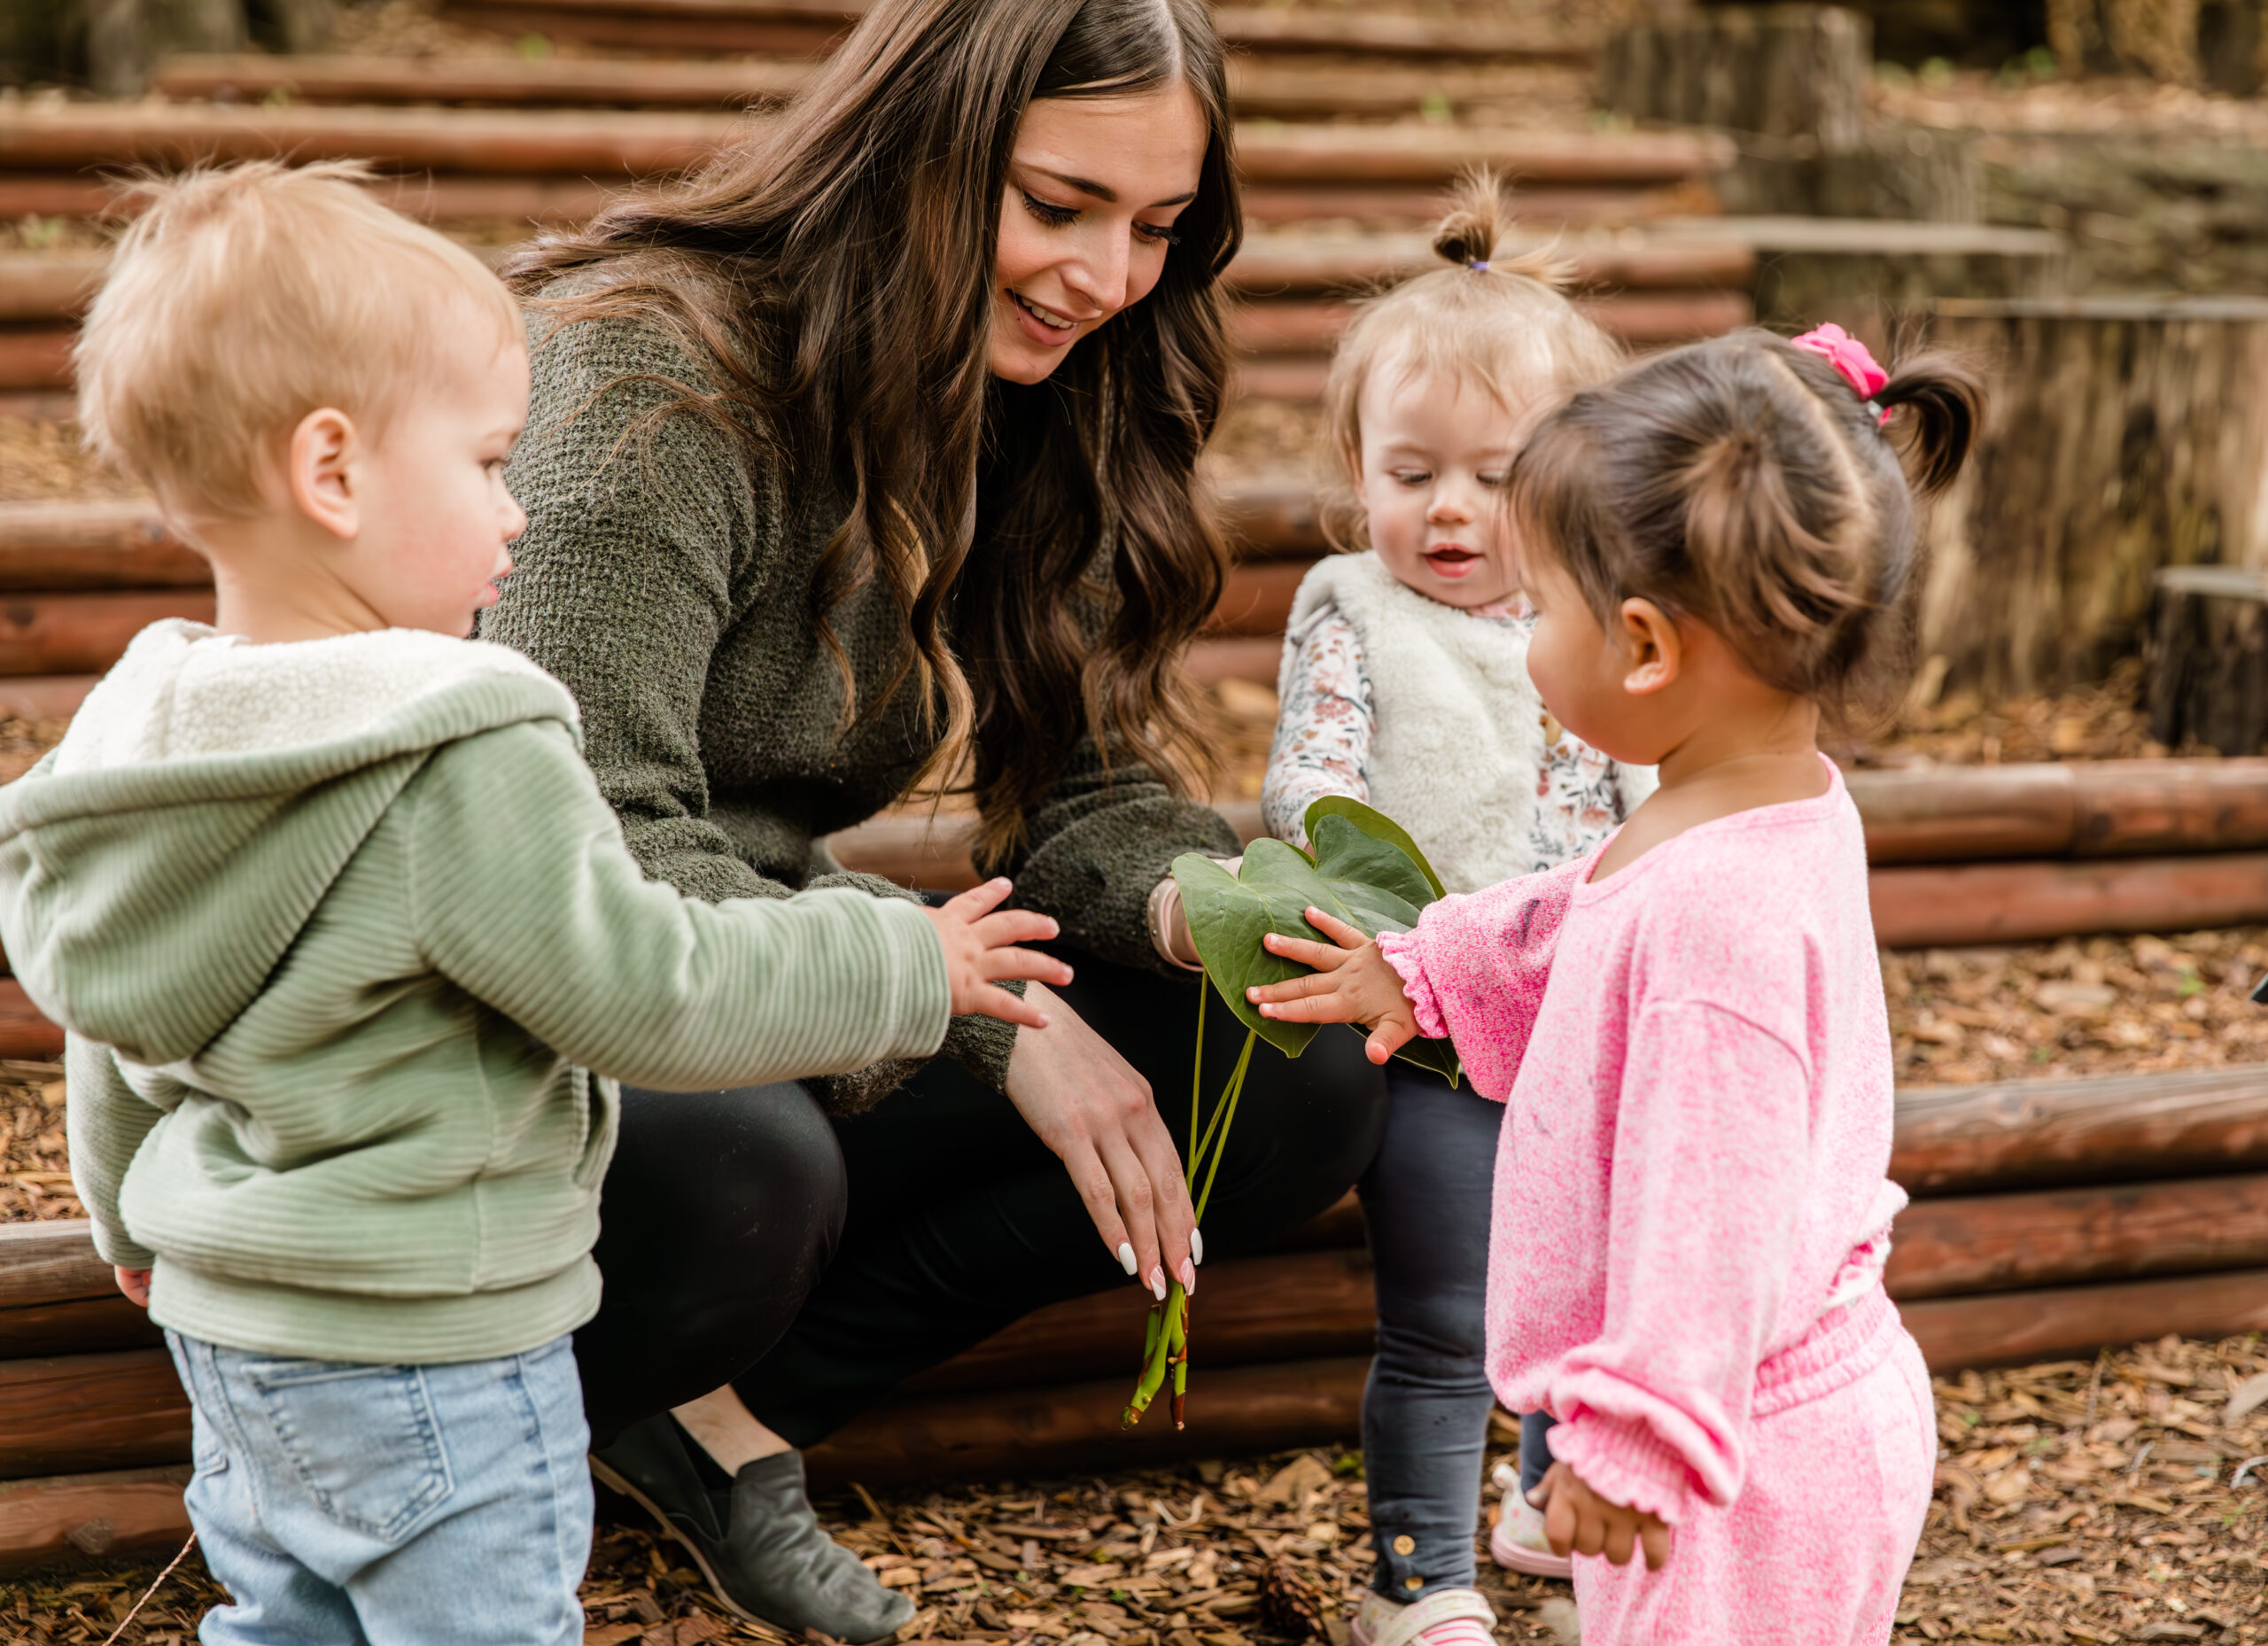 A woman with long brown hair and a green sweater shows a large green leaf to three young children.